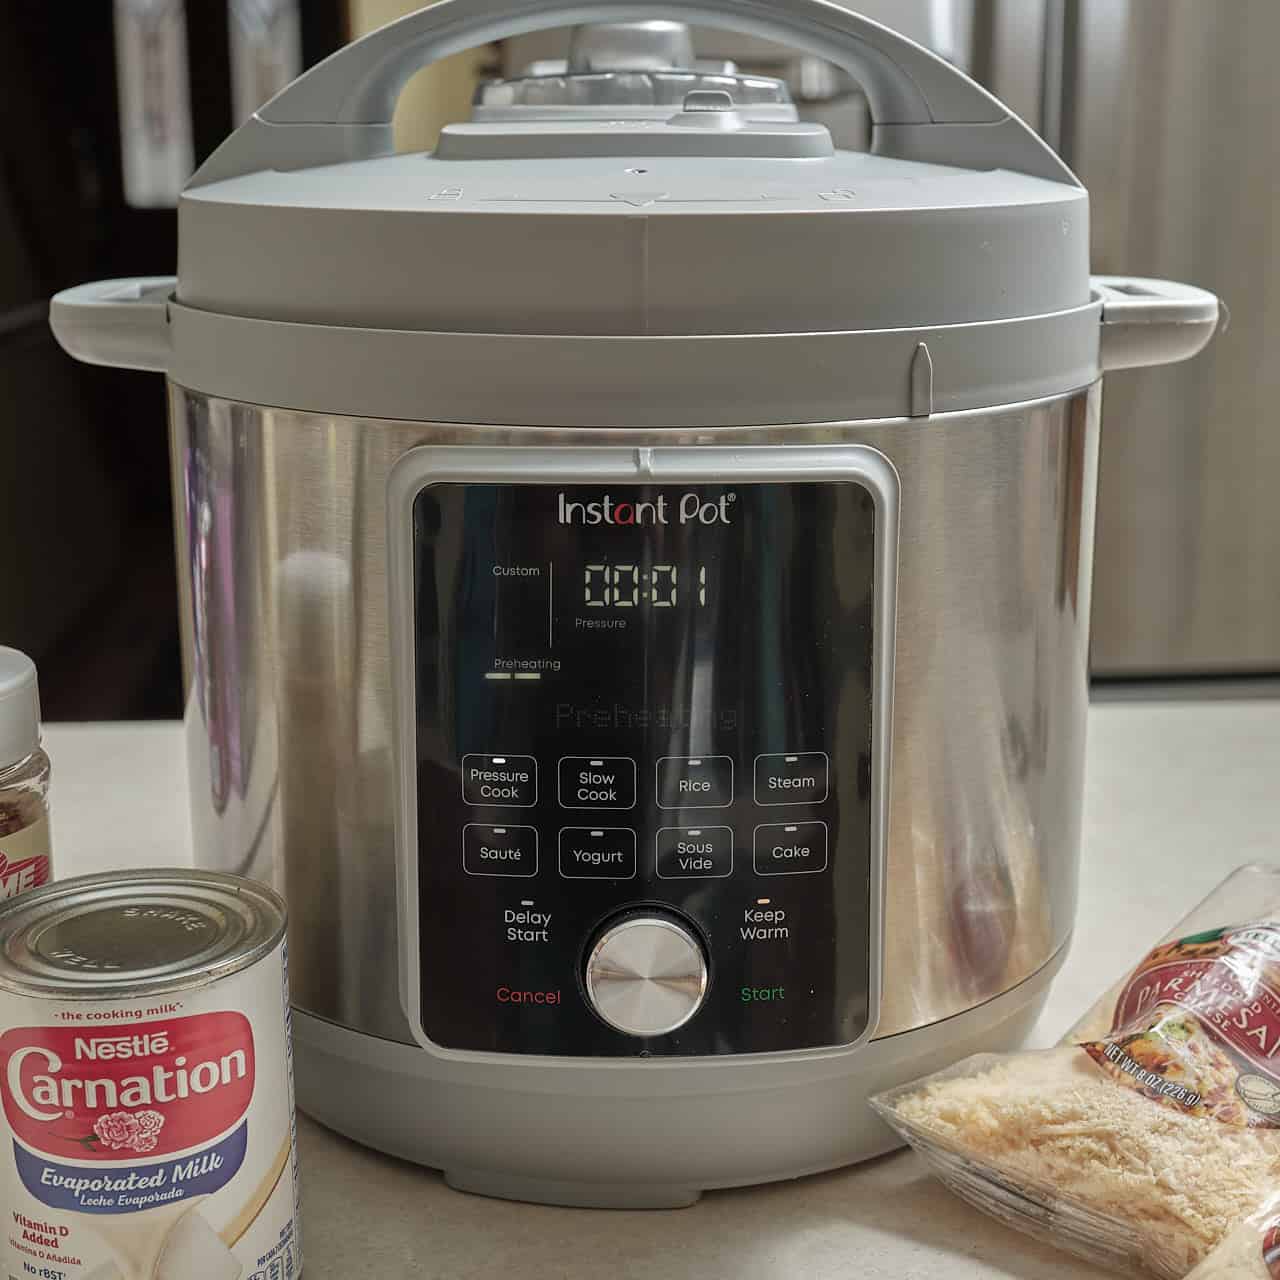 Instant Pot set to Pressure Cook for 1 minute